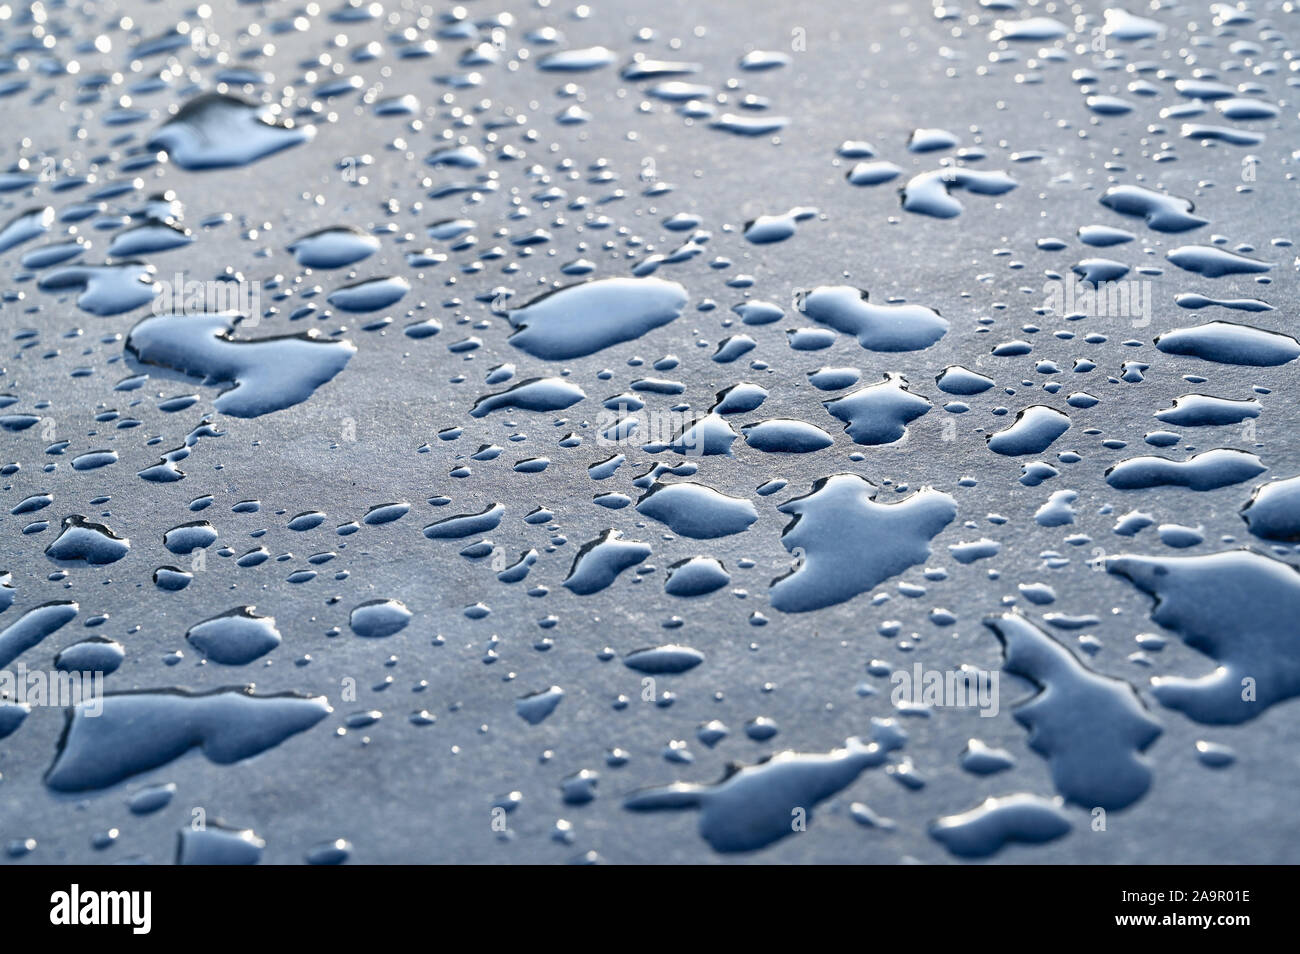 Drops of water against a dark background. Stock Photo